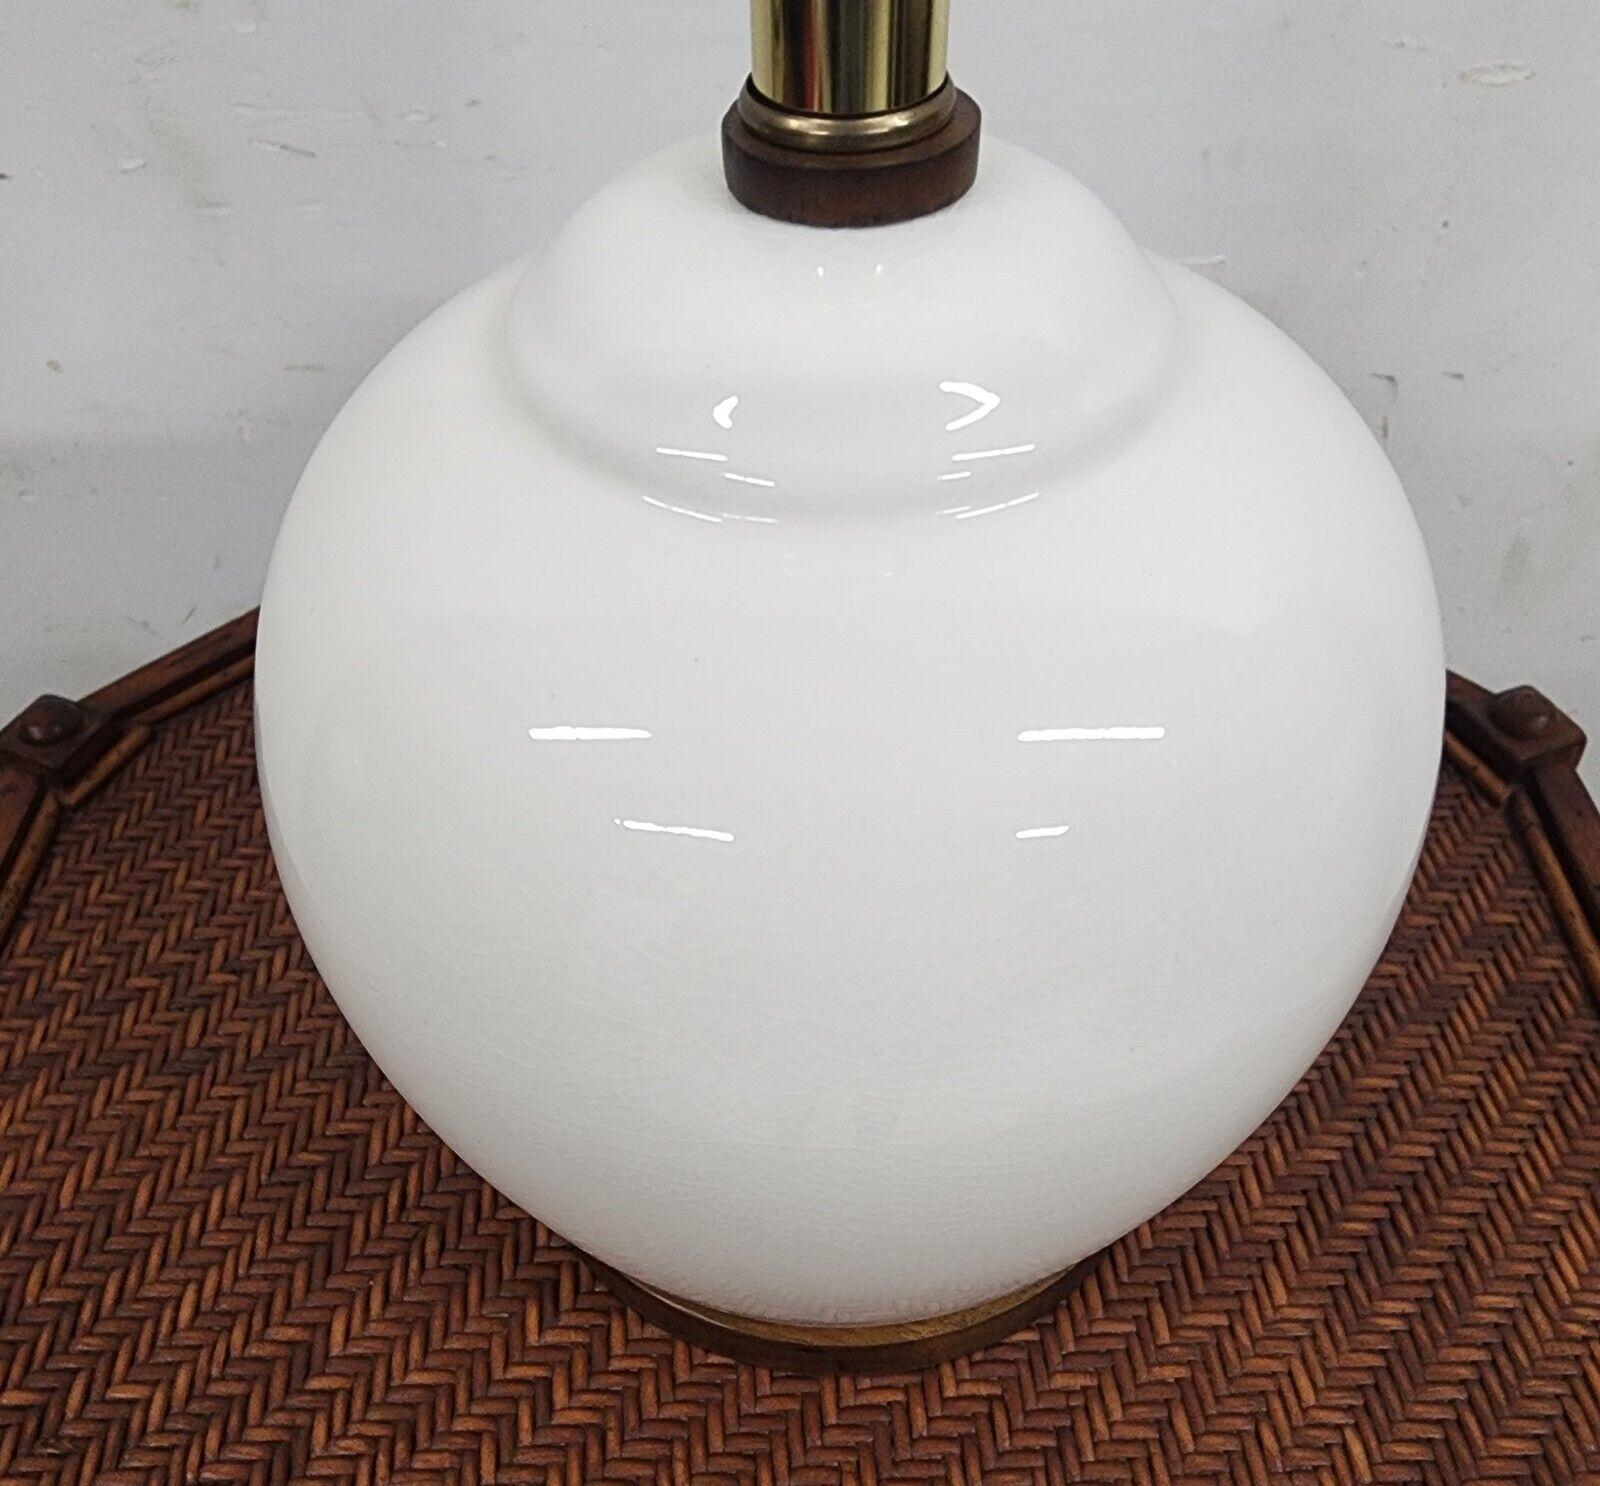 For FULL item description click on CONTINUE READING at the bottom of this page.

Offering One Of Our Recent Palm Beach Estate Fine Lighting Acquisitions Of A
Ralph Lauren Ceramic Table Lamp in Eggshell White with Crackle Finish

We also have another